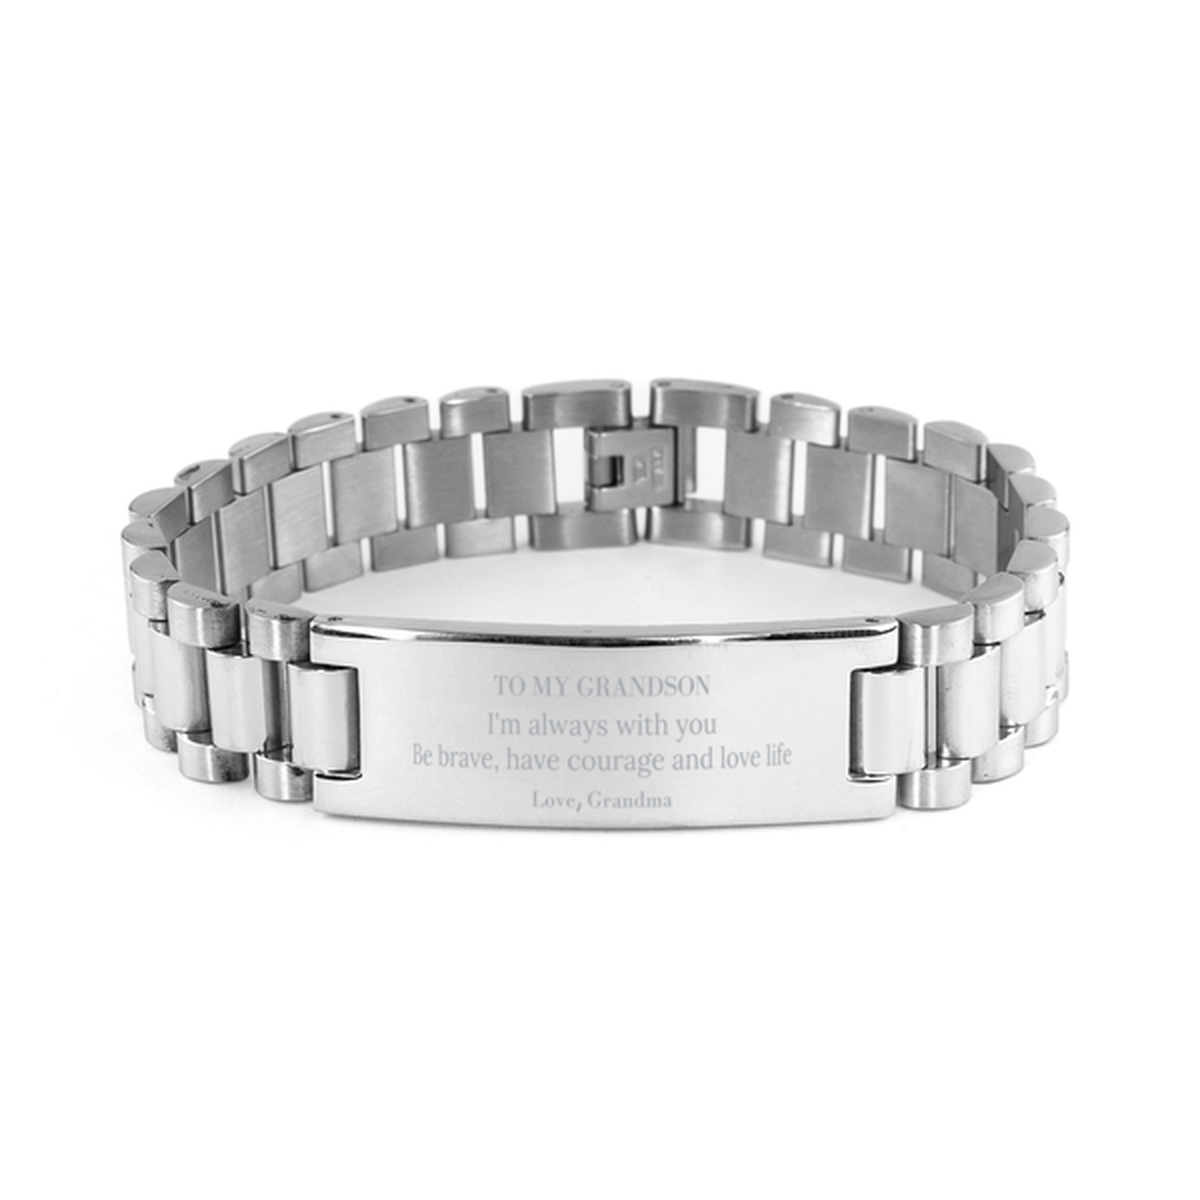 To My Grandson Gifts from Grandma, Unique Ladder Stainless Steel Bracelet Inspirational Christmas Birthday Graduation Gifts for Grandson I'm always with you. Be brave, have courage and love life. Love, Grandma